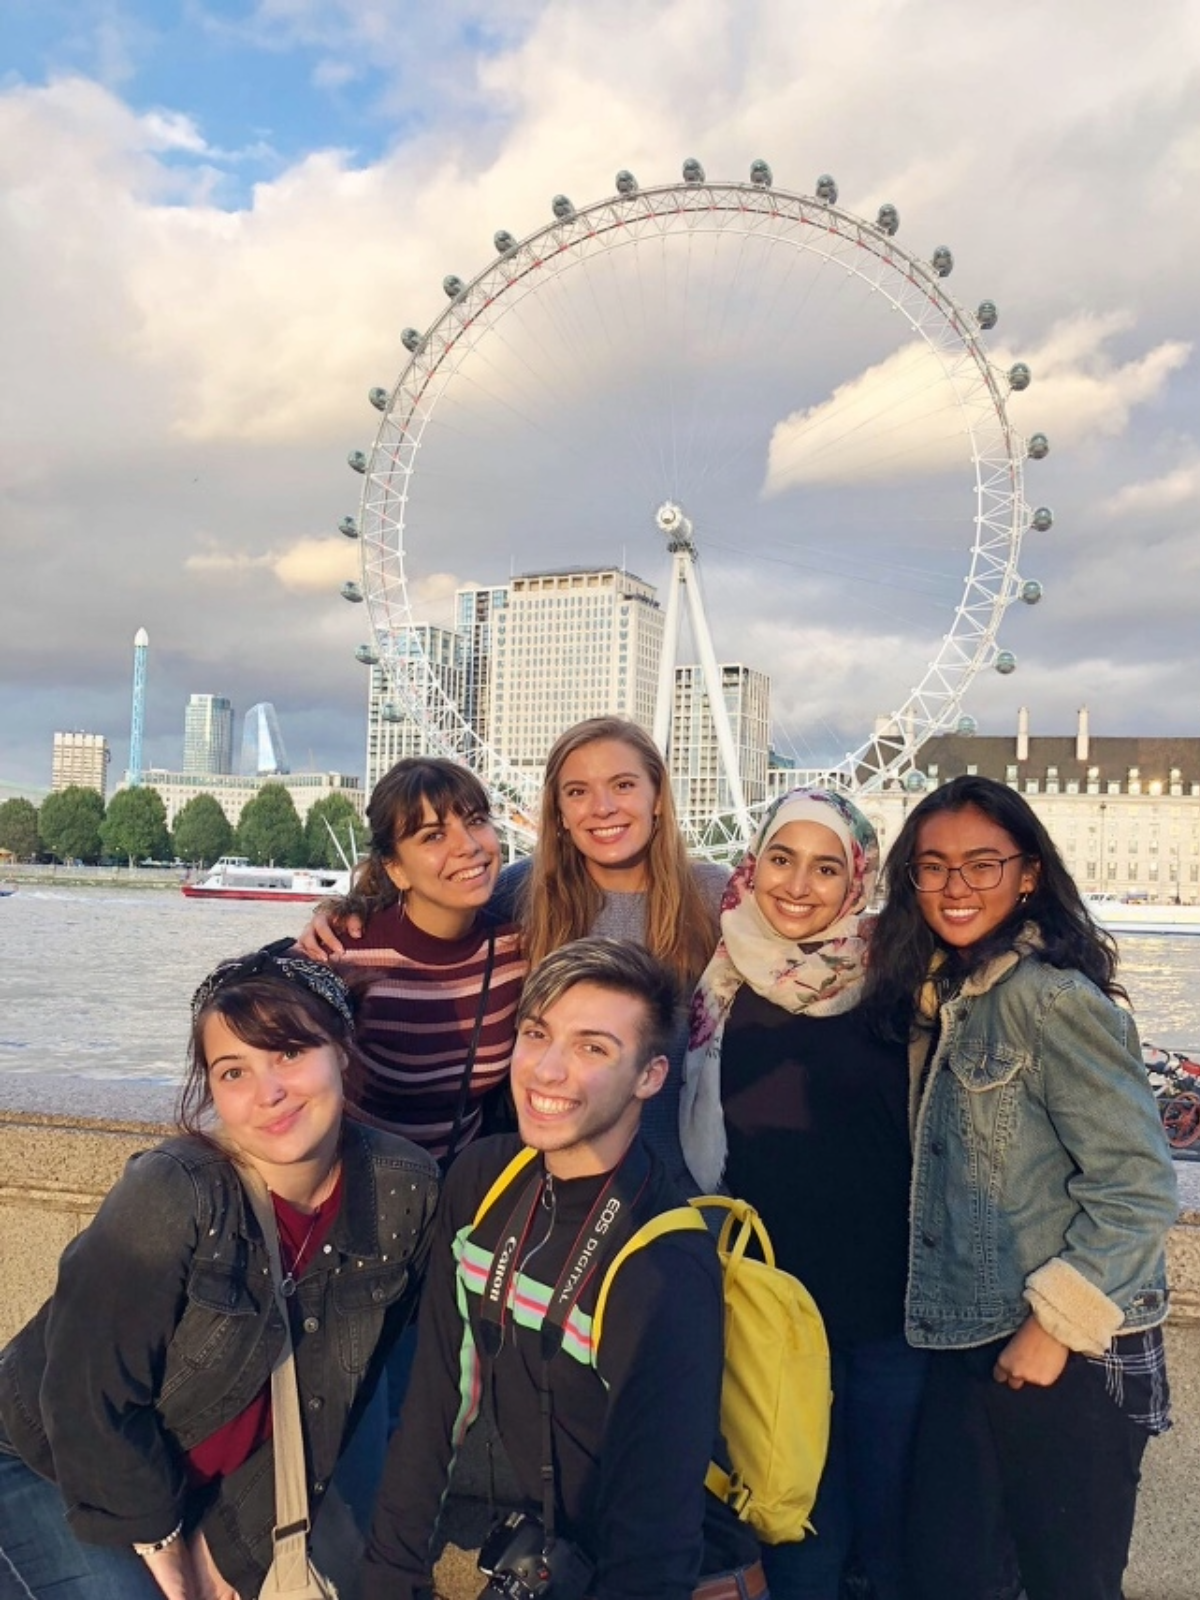 Zoe Gabrielson's education abroad trip to London, group photo of students she met standing in front of a river and Farris wheel